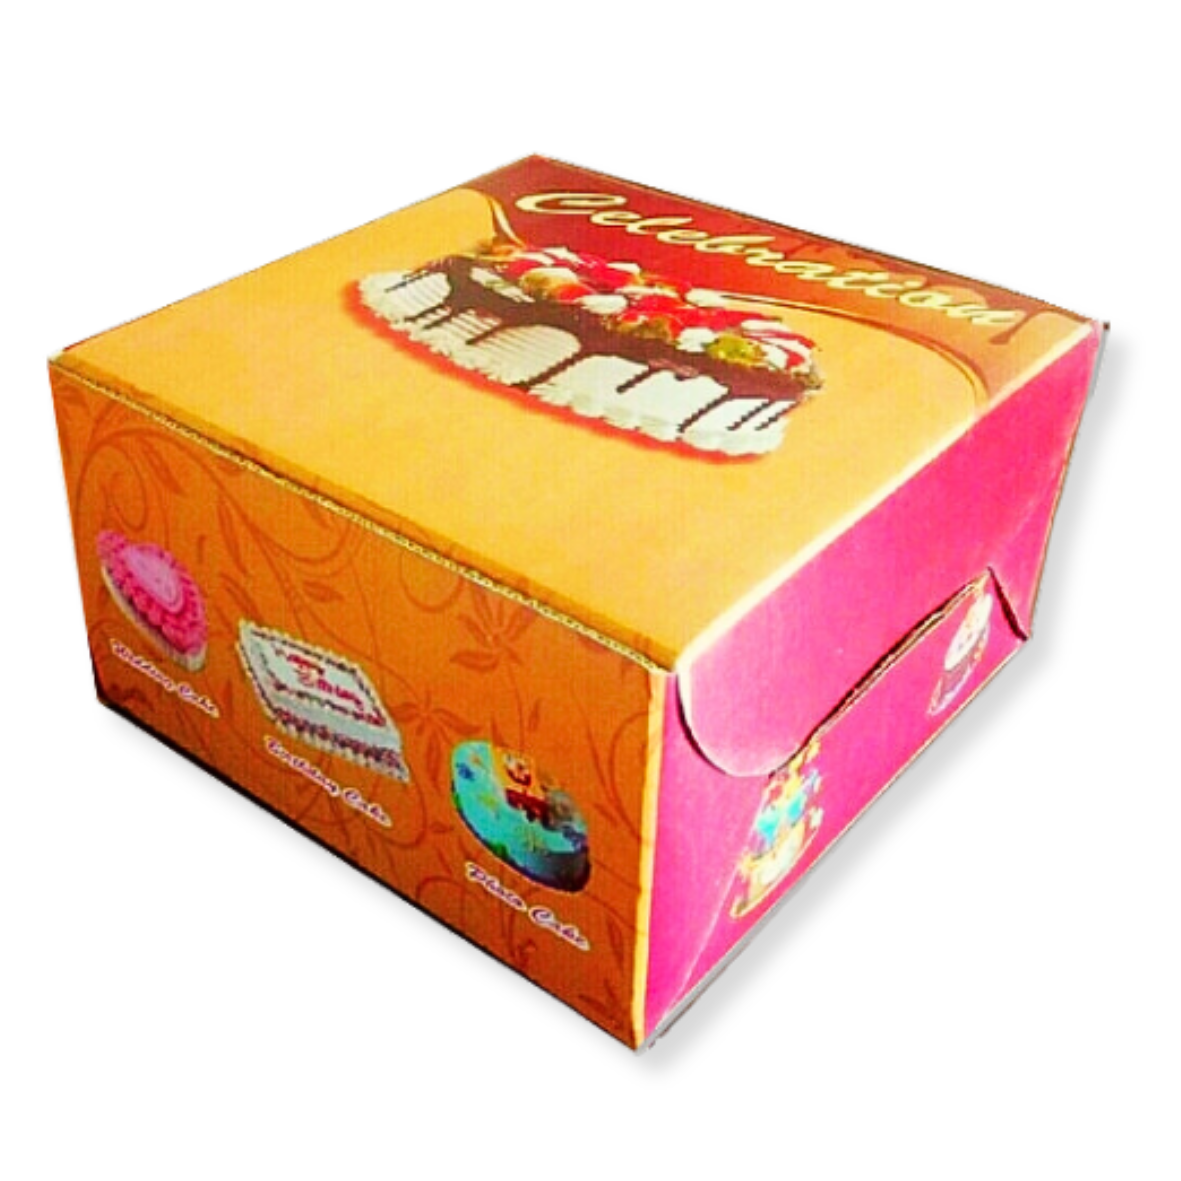 Cake Box Corrugated For Printed 1.5kg [12x12x5] Pack of 10